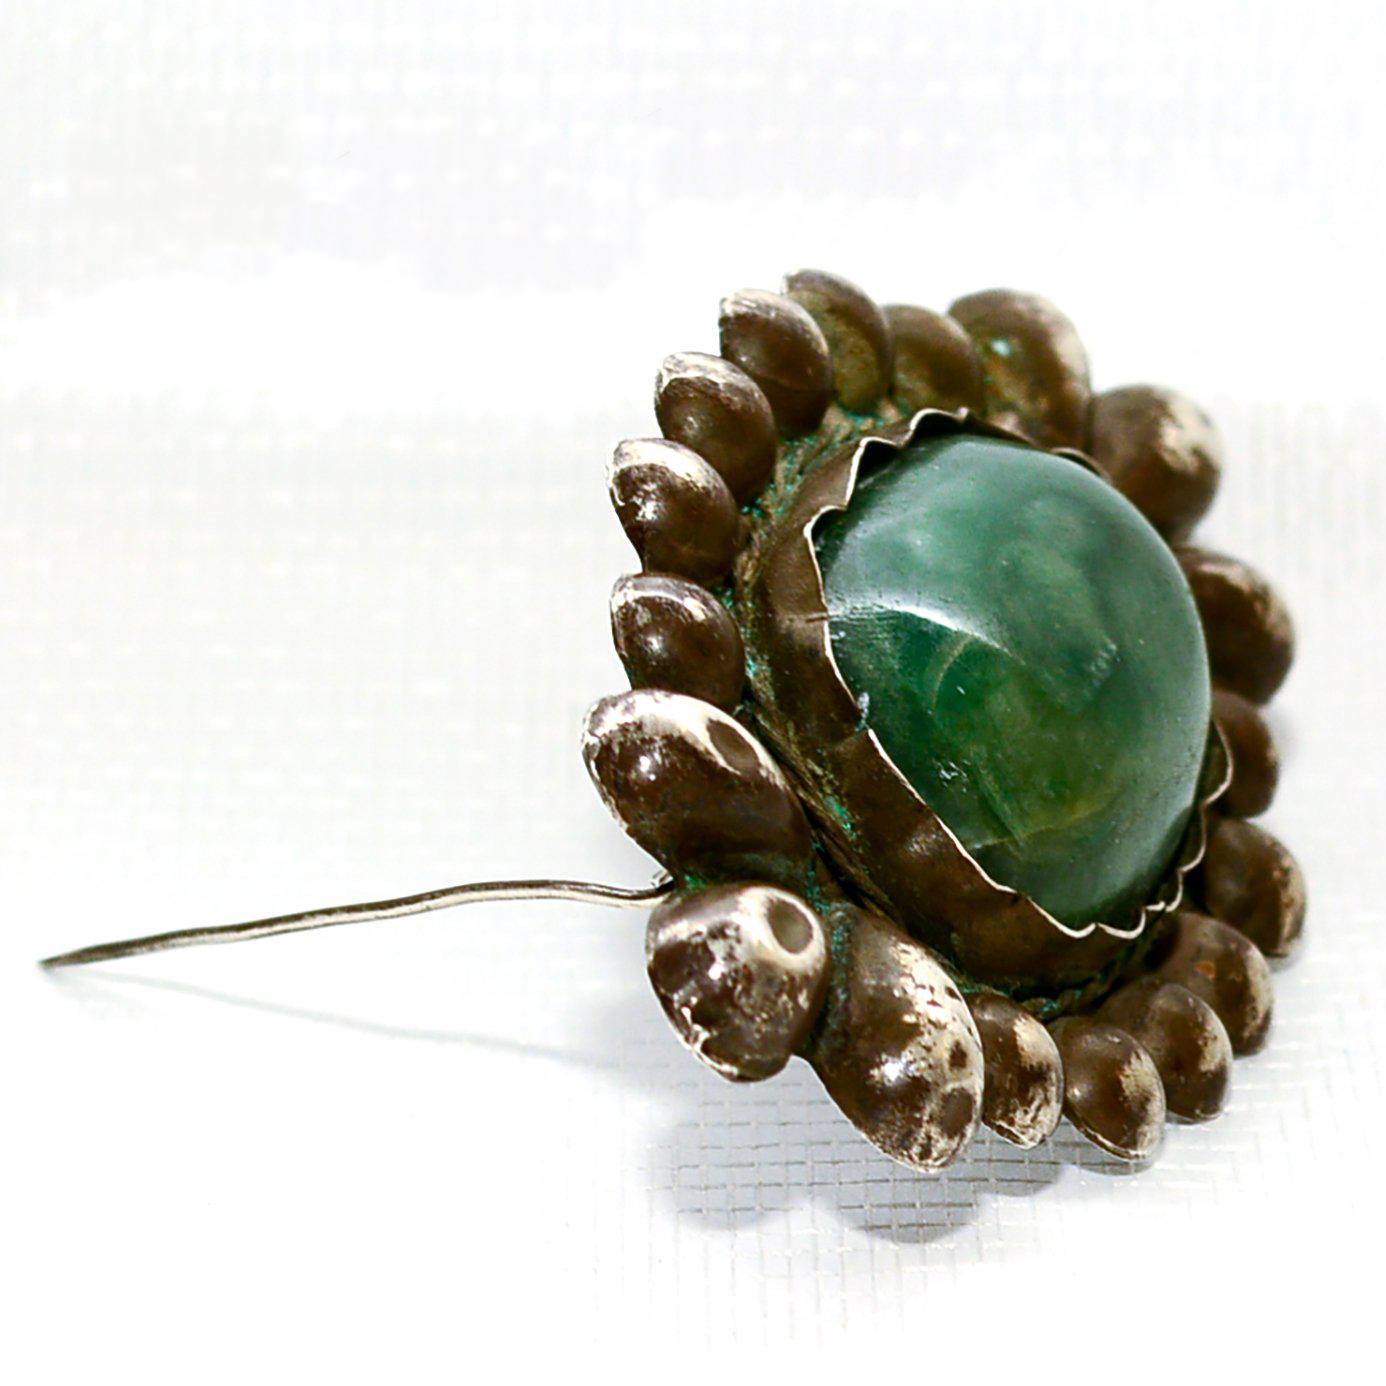 Rare William Spratling Brooch Sterling Silver with Mexican Cabochon Jade 2